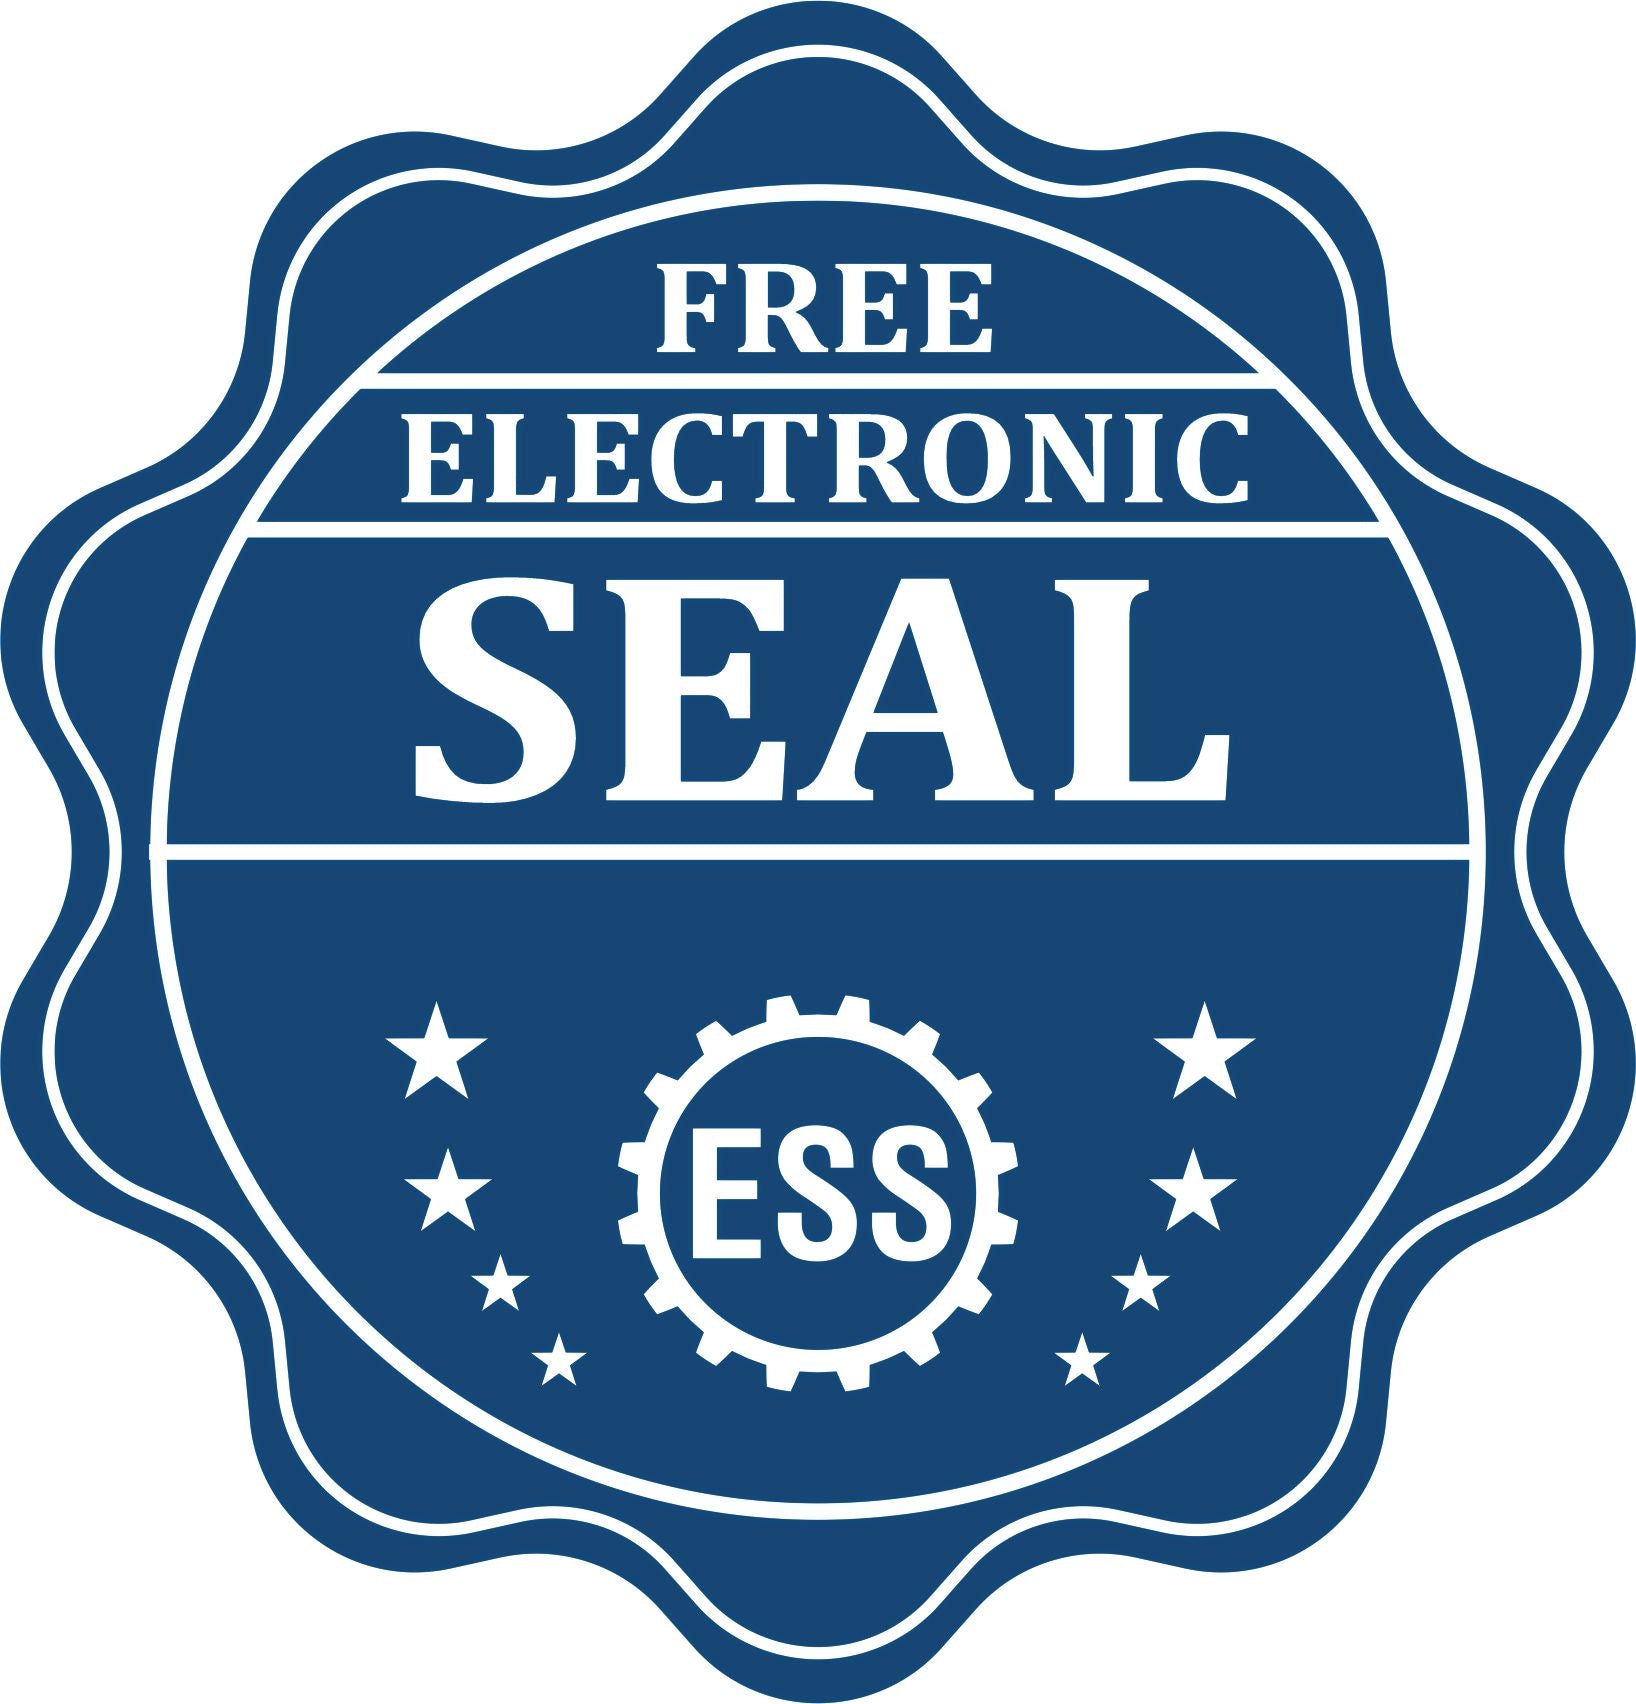 A badge showing a free electronic seal for the Premium MaxLight Pre-Inked Oklahoma Engineering Stamp with stars and the ESS gear on the emblem.